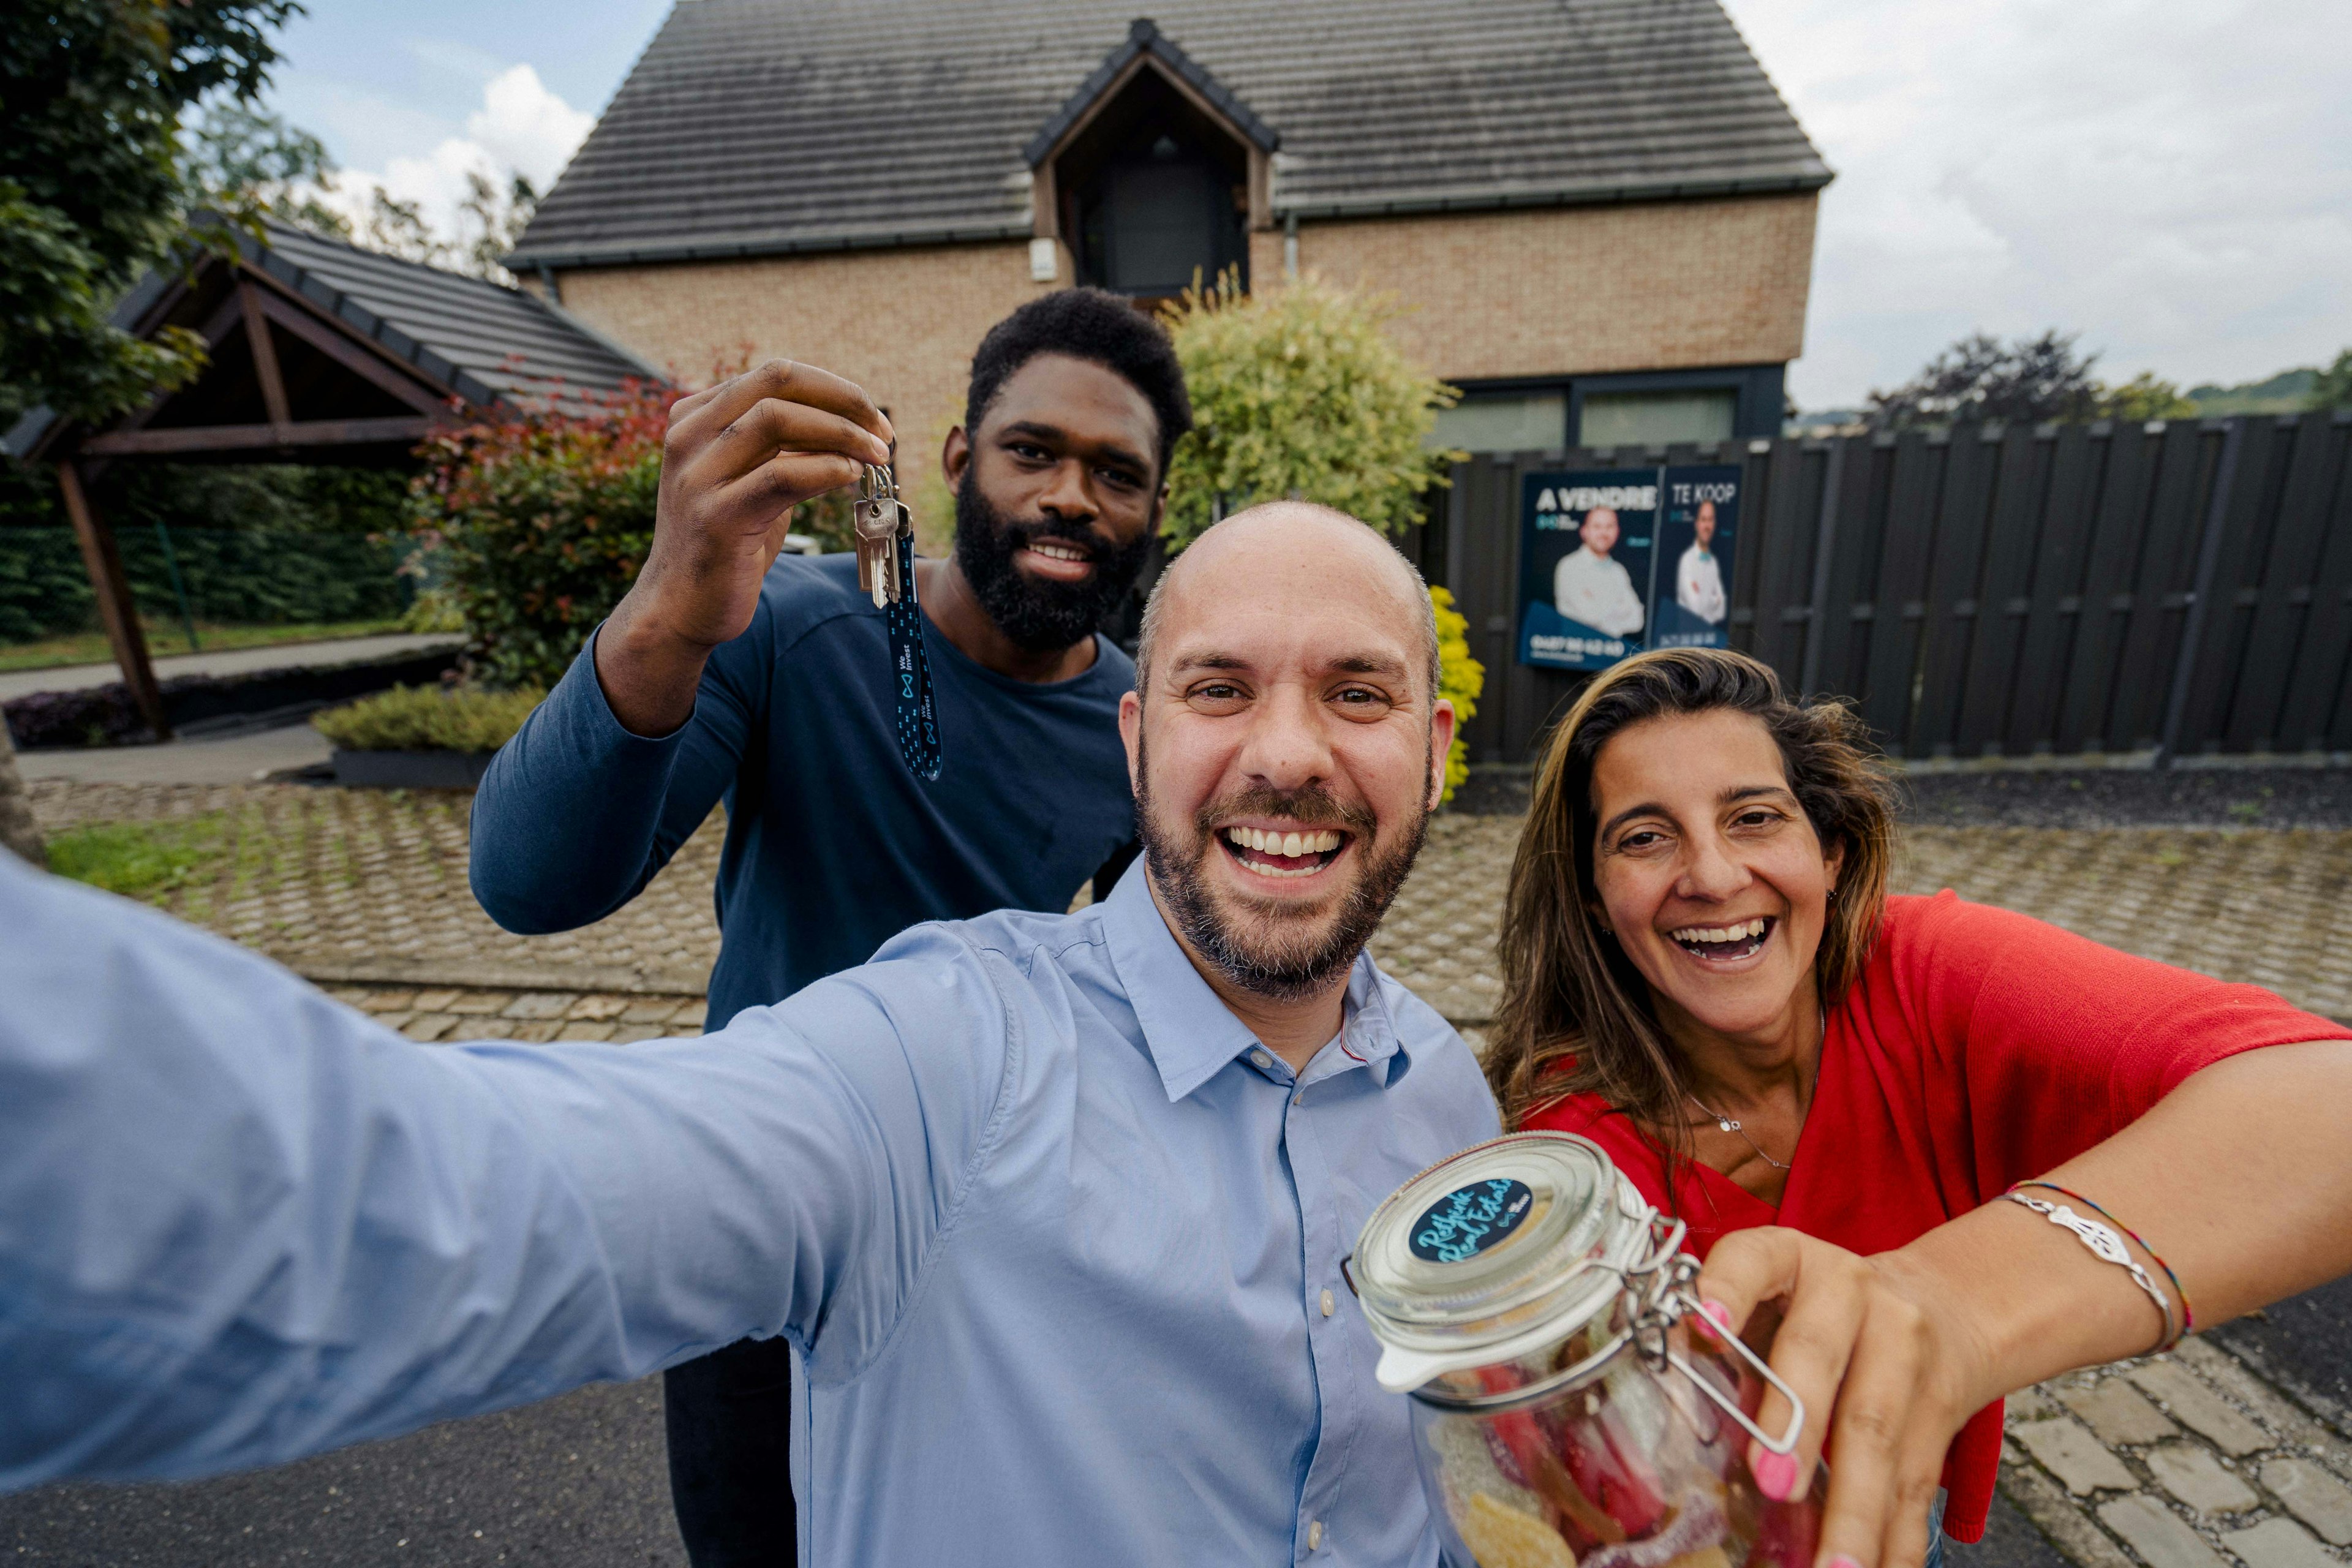 Selfie with agent and happy houseowners to celebrate their home's sale thanks to a local We Invest agent.